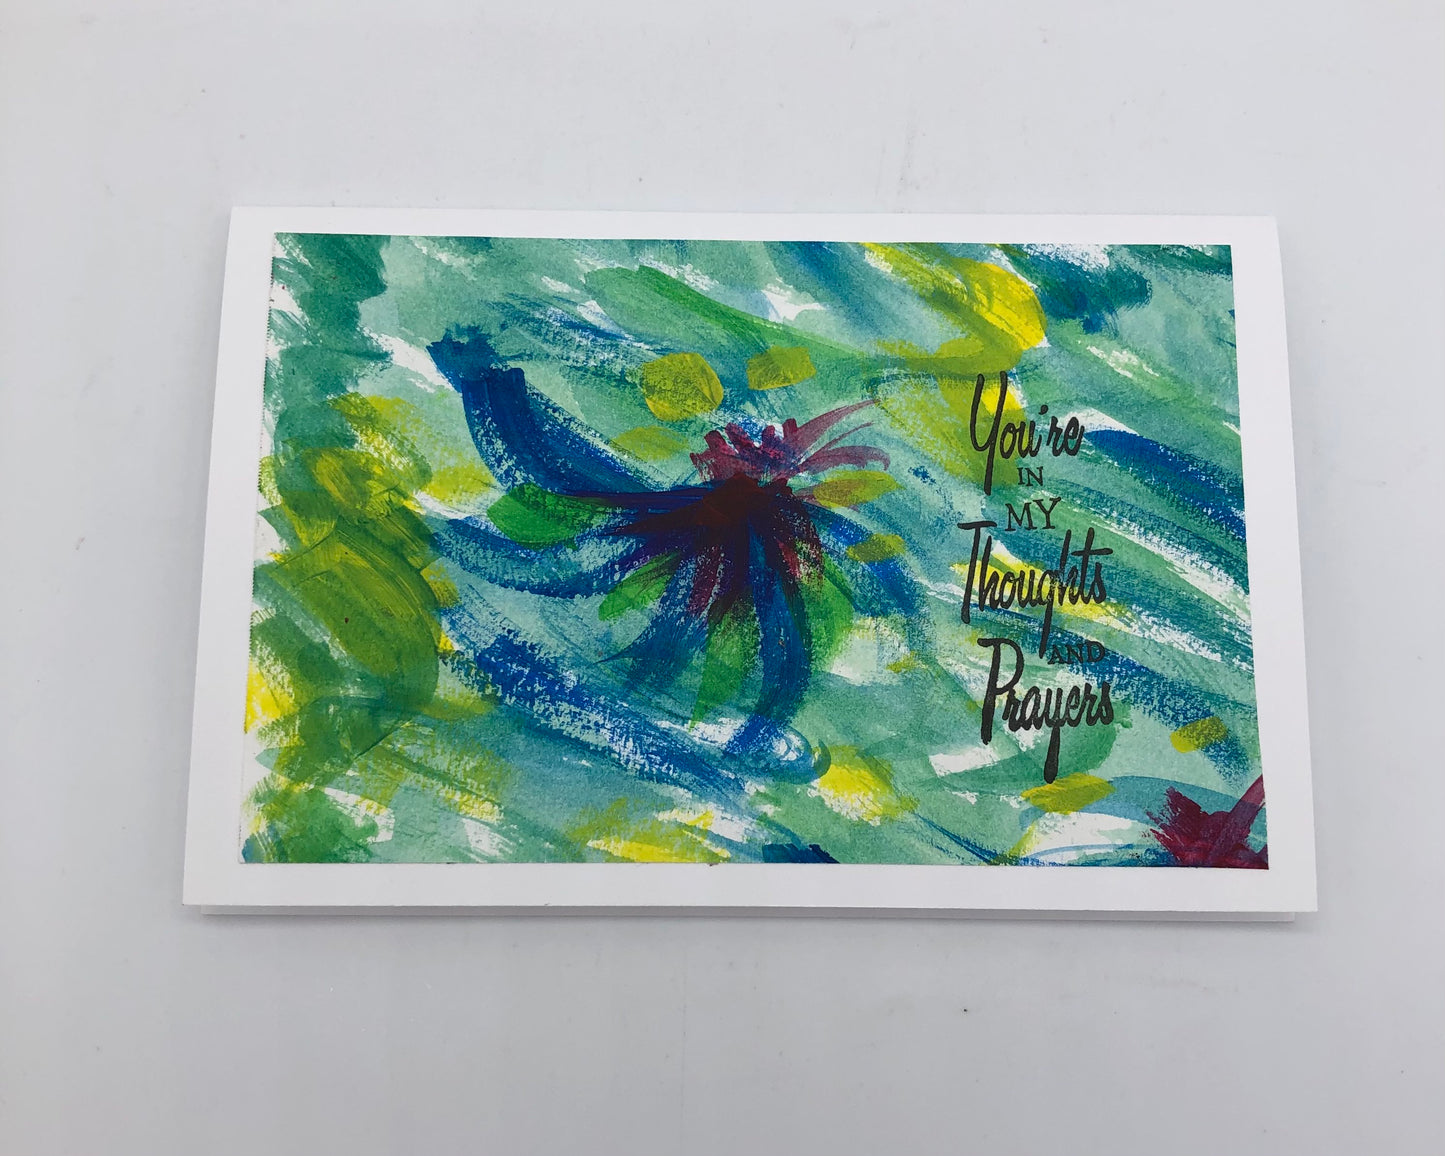 White greeting card with large acrylic painting in shades of greens, blues and yellow.  Some of the white background is showing through.  In the center ti a partial swirl in blue..  On top of the painting is stamped "You're in my thoughts and prayers" in black on the right hand side.